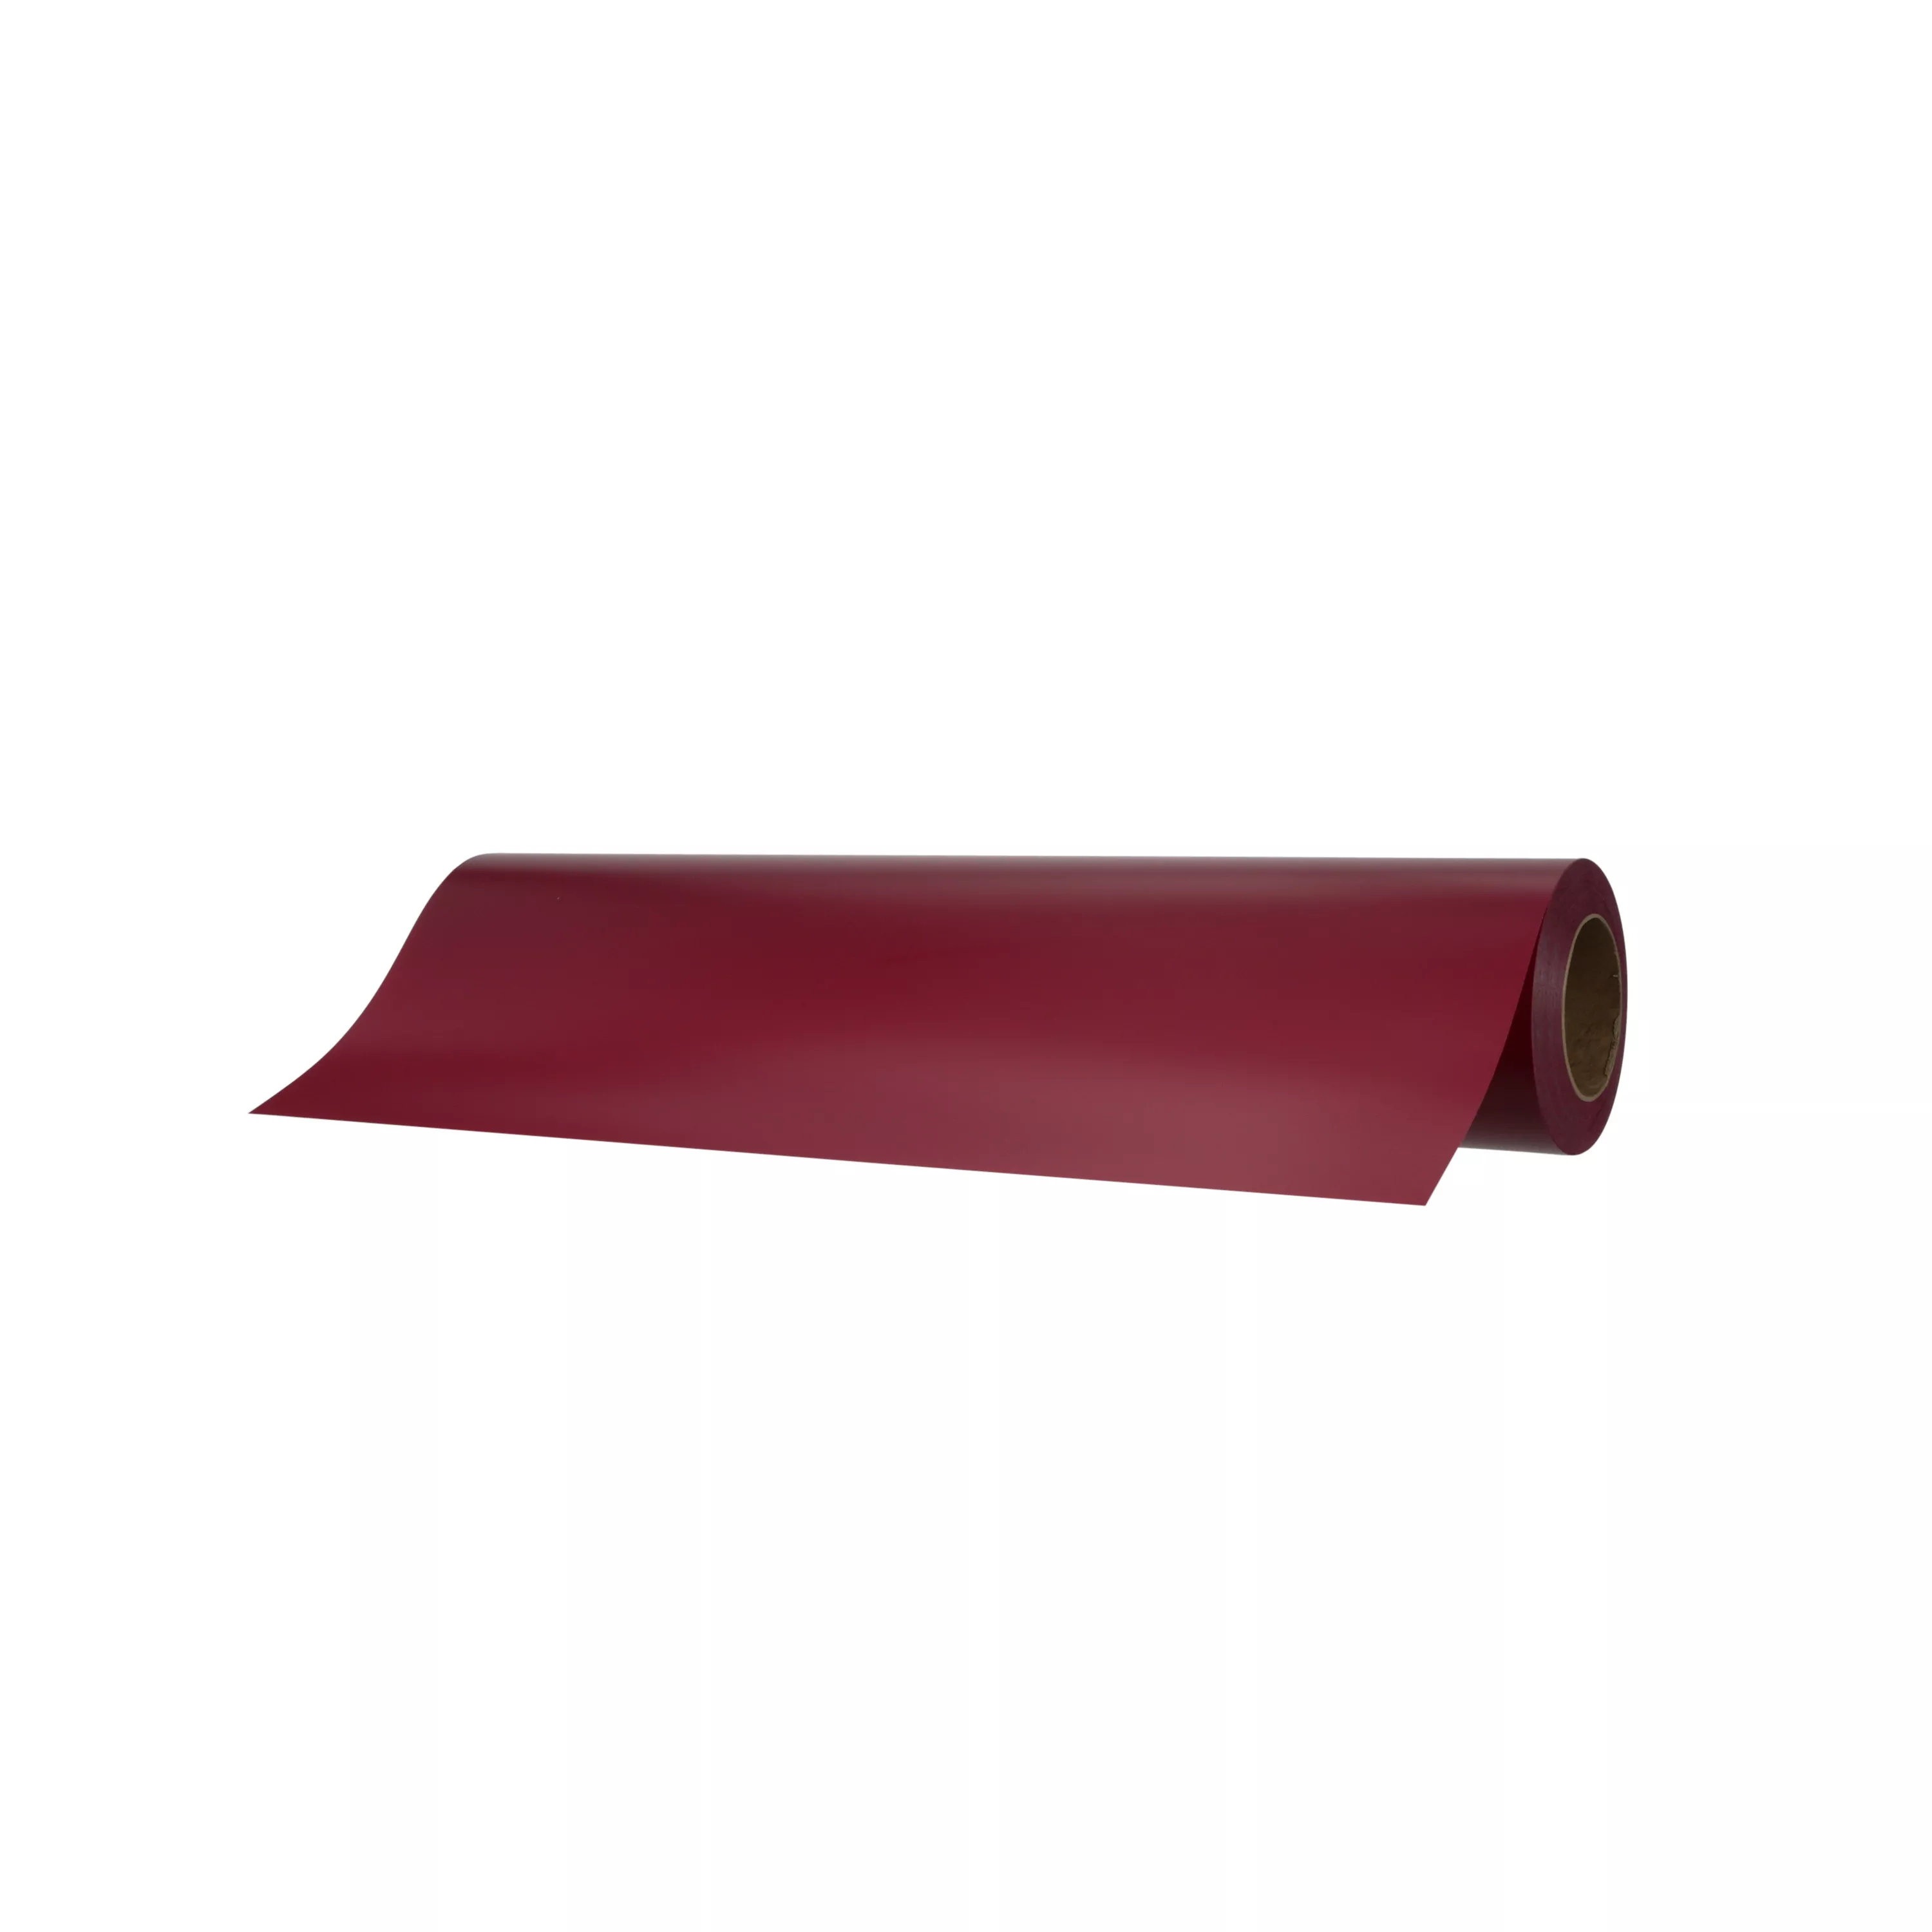 3M™ Scotchcal™ Translucent Graphic Film 3630-328, Berry Burgundy, 48 in
x 50 yd, 1 Roll/Case